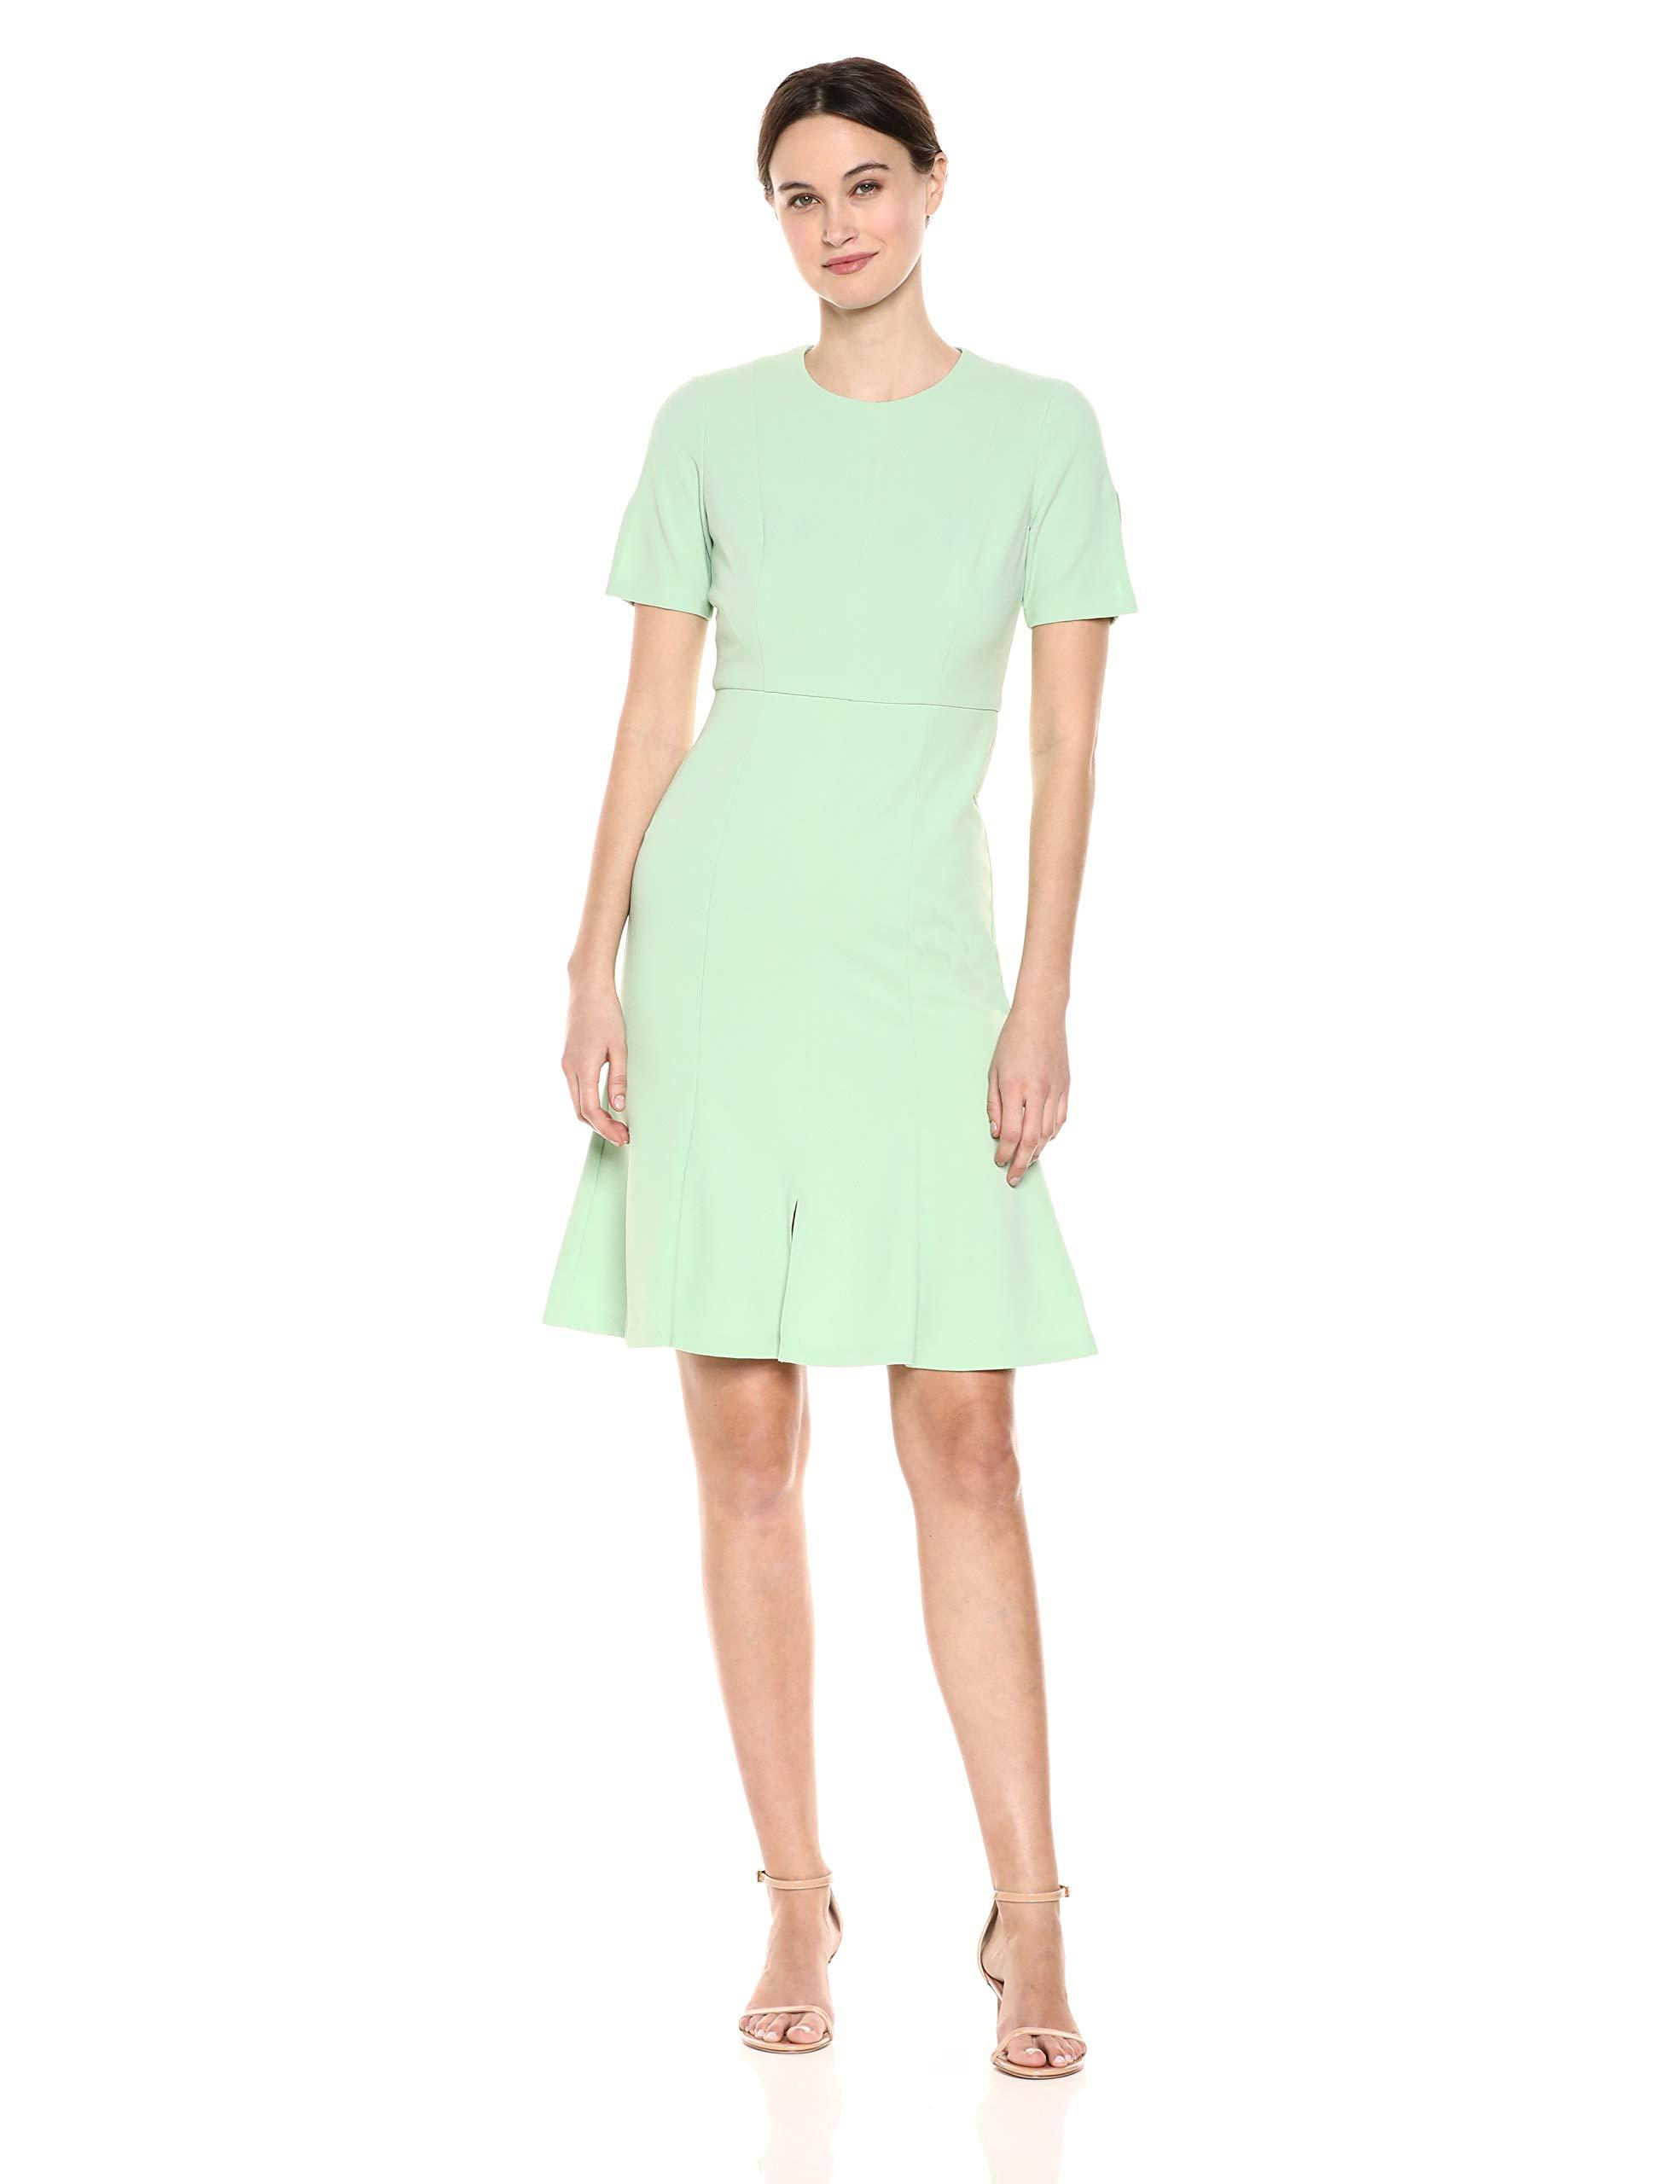 Donna Morgan Split Sleeve Fit And Flare Dress in Mint (Green) - Lyst